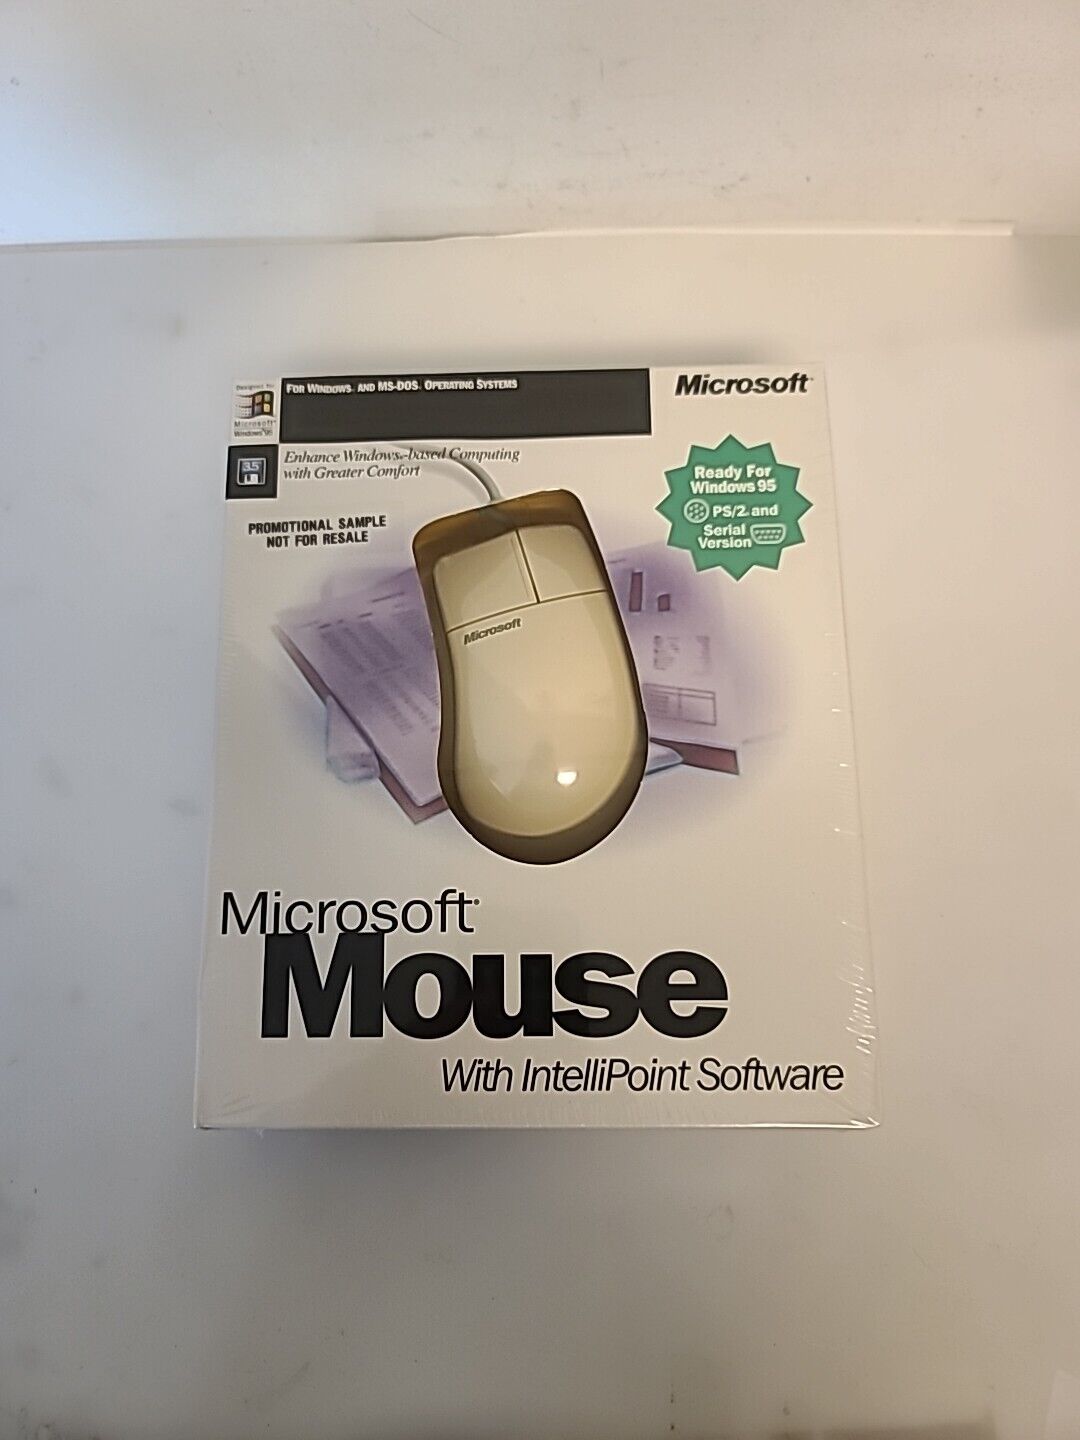 Vintage Microsoft Mouse 2.0 (Serial) with IntelliPoint - New/Unopened/Sealed